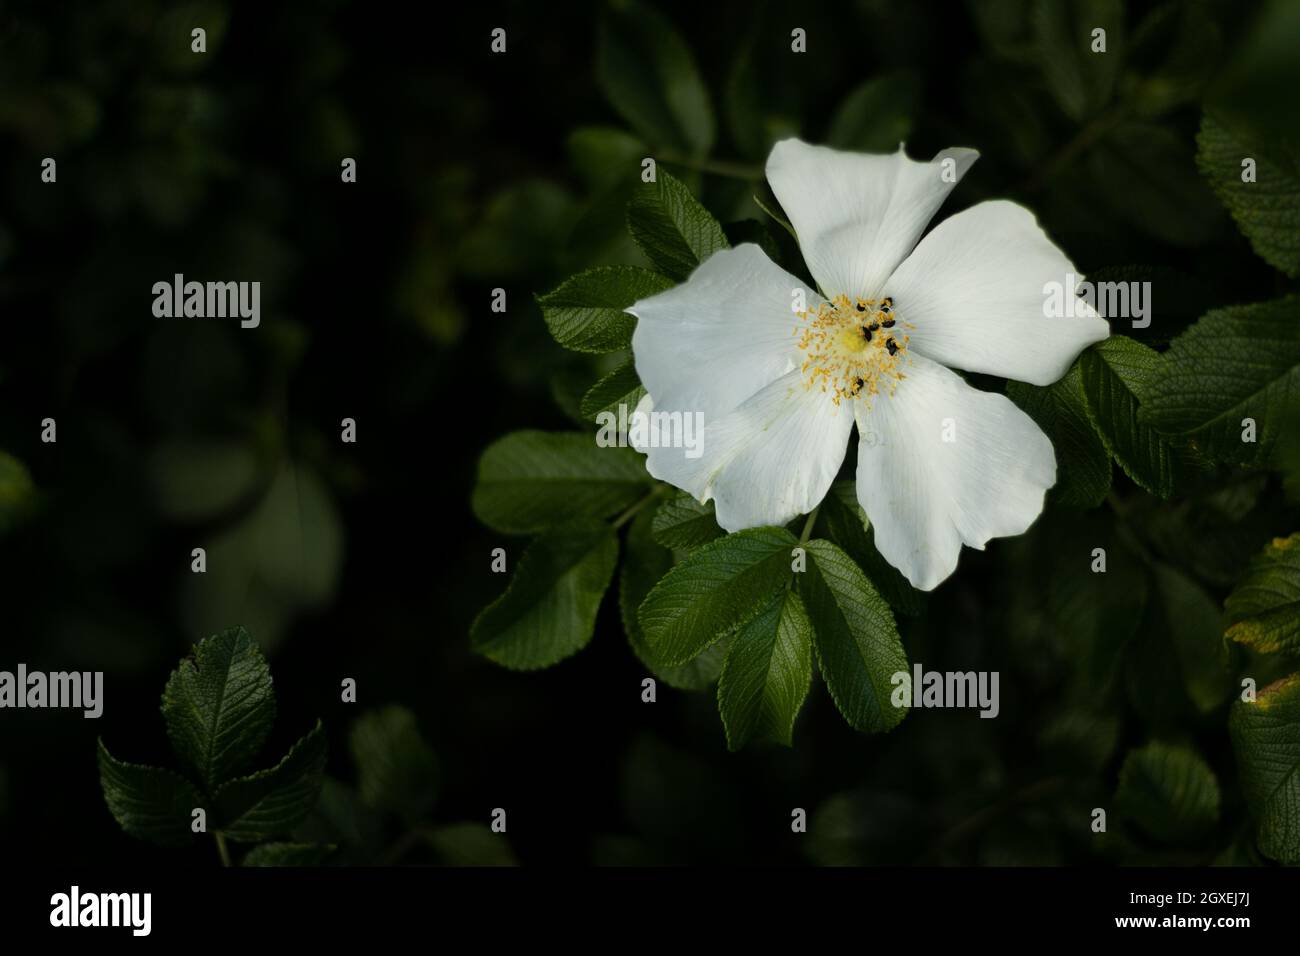 White rugosa rose in the wild, surrounded by green leaves and a dark blurry background Stock Photo